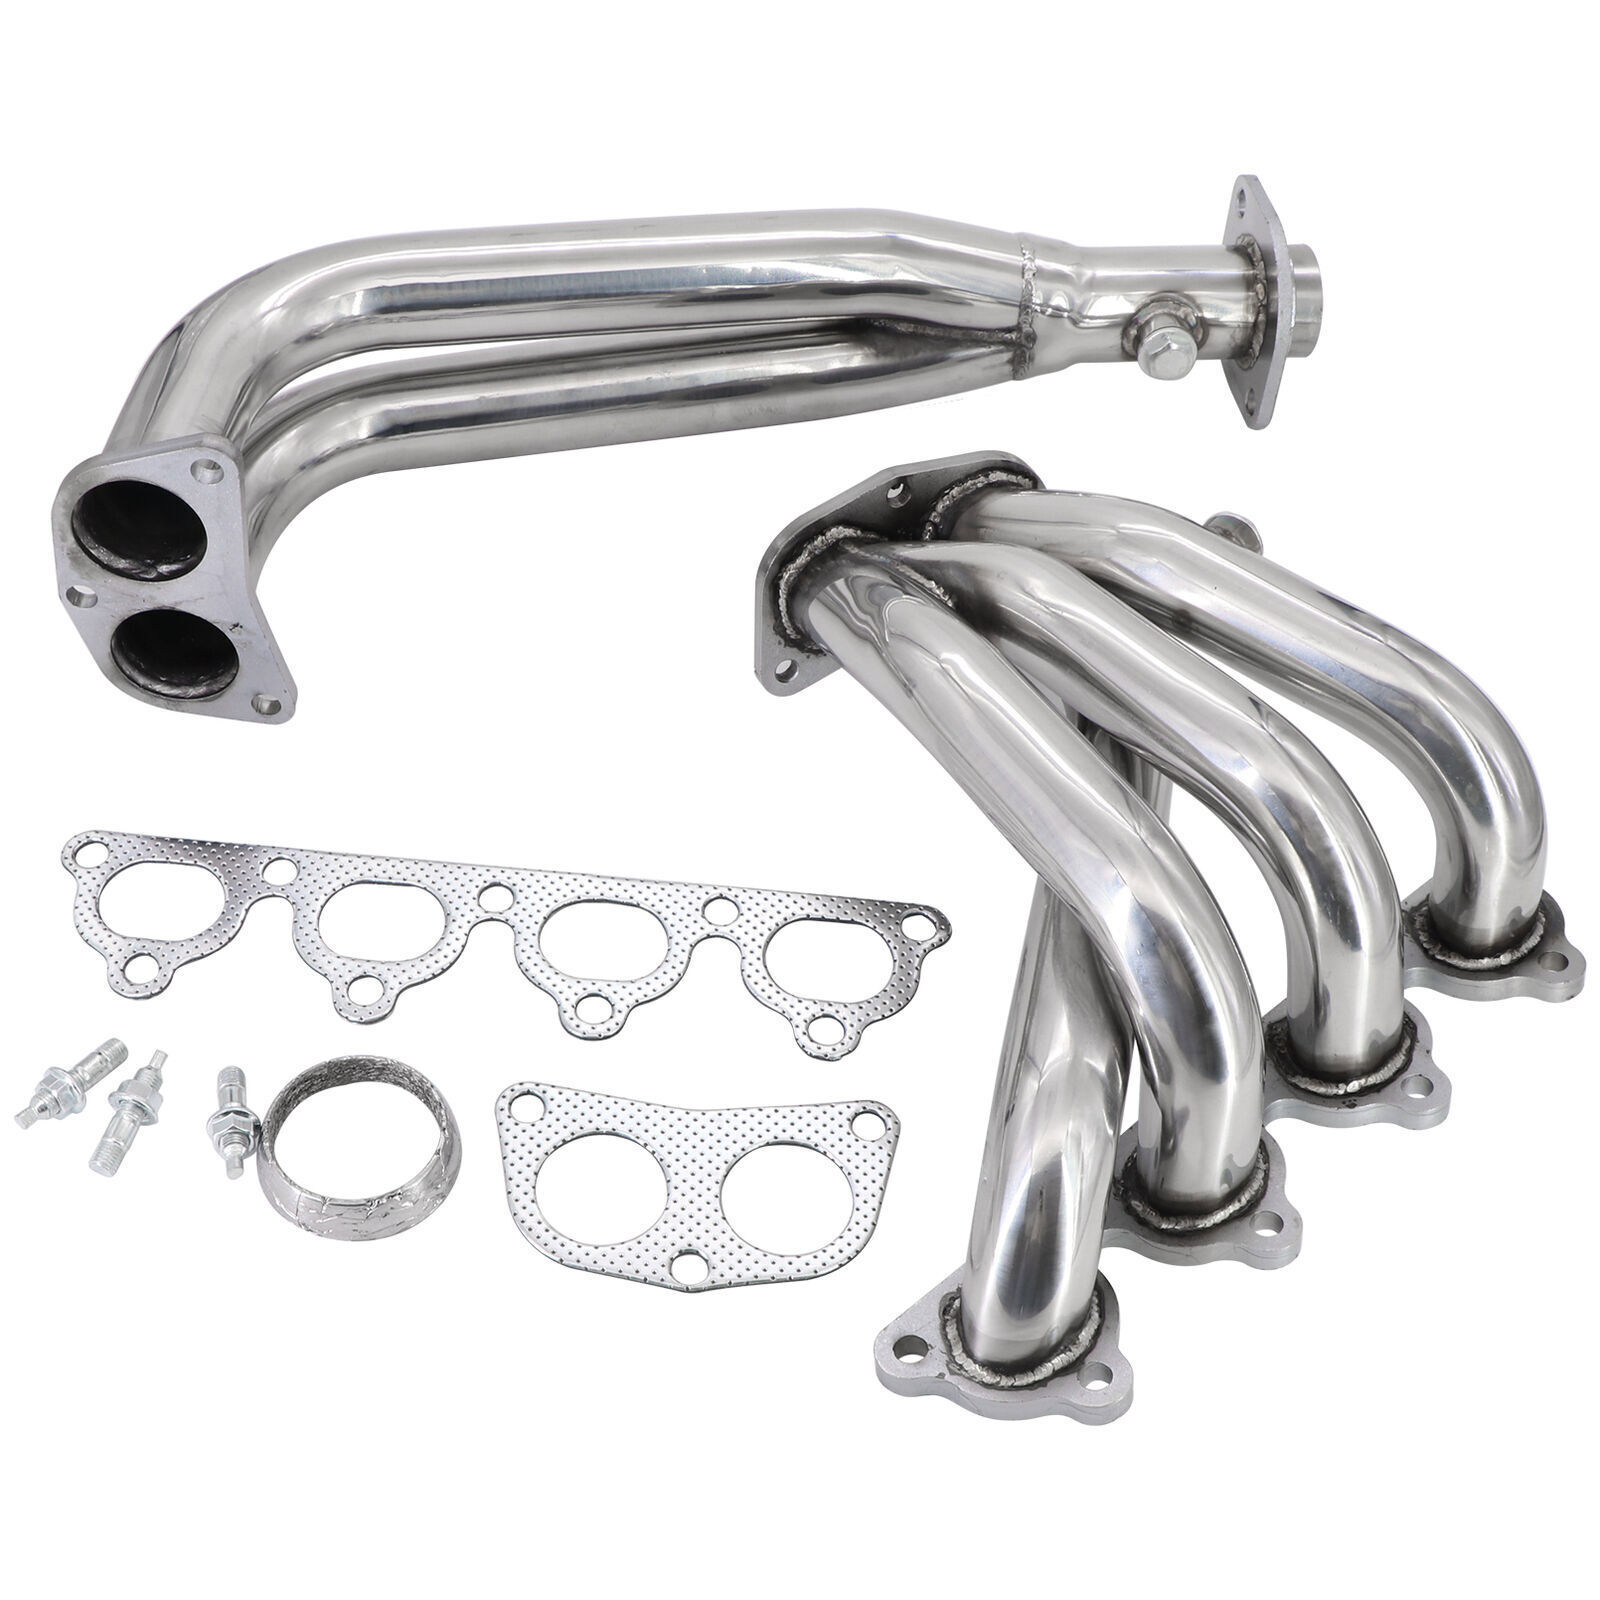 New Stainless exhaust Header for Honda Civic 88-00 EX/LX/DX D16